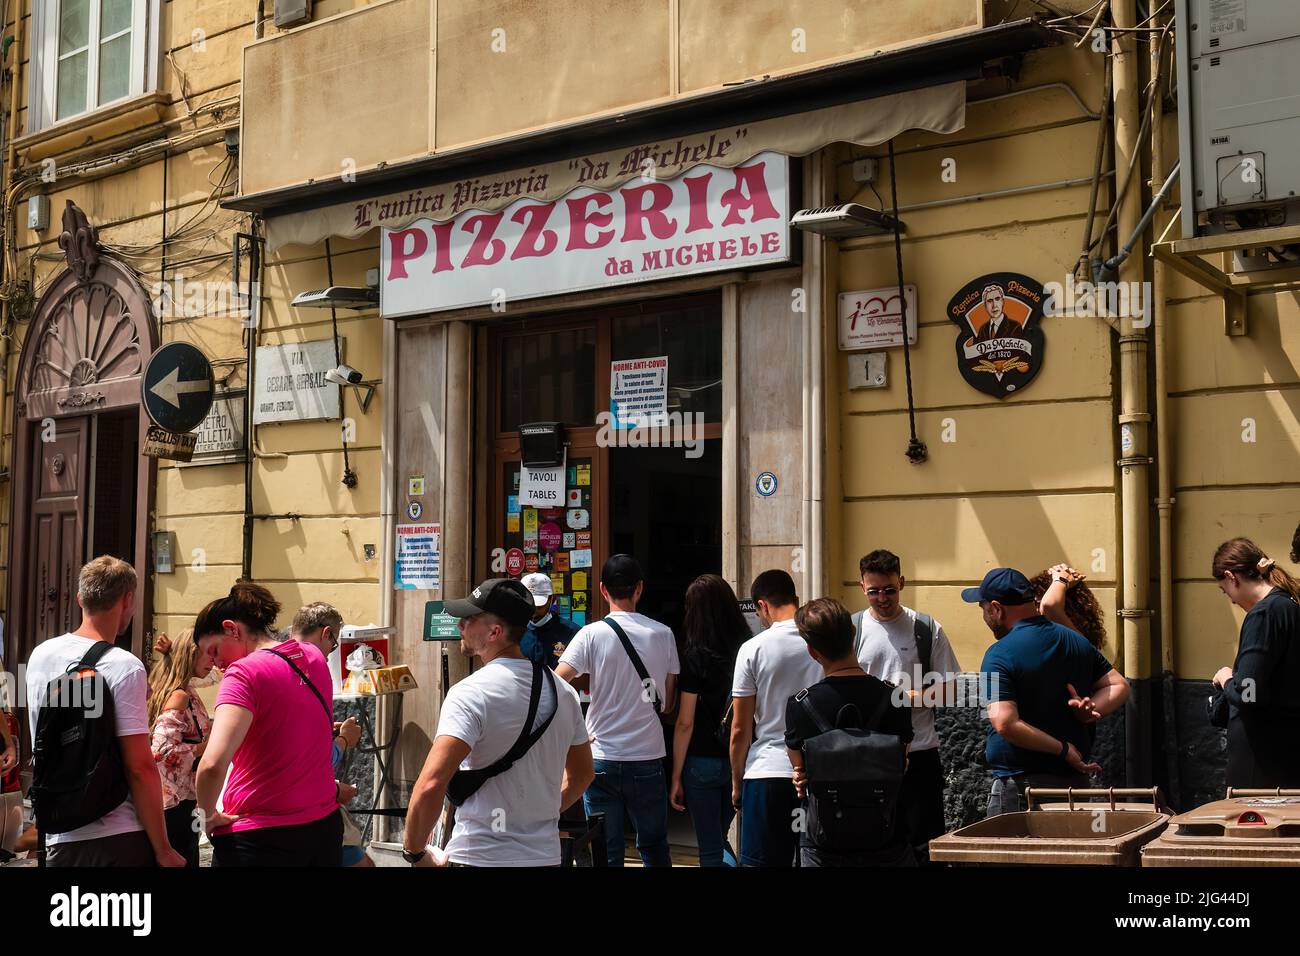 Naples, Italy. May 27, 2022. People waiting outside the famous L'antica Pizzeria da Michele in Naples, Italy. Stock Photo